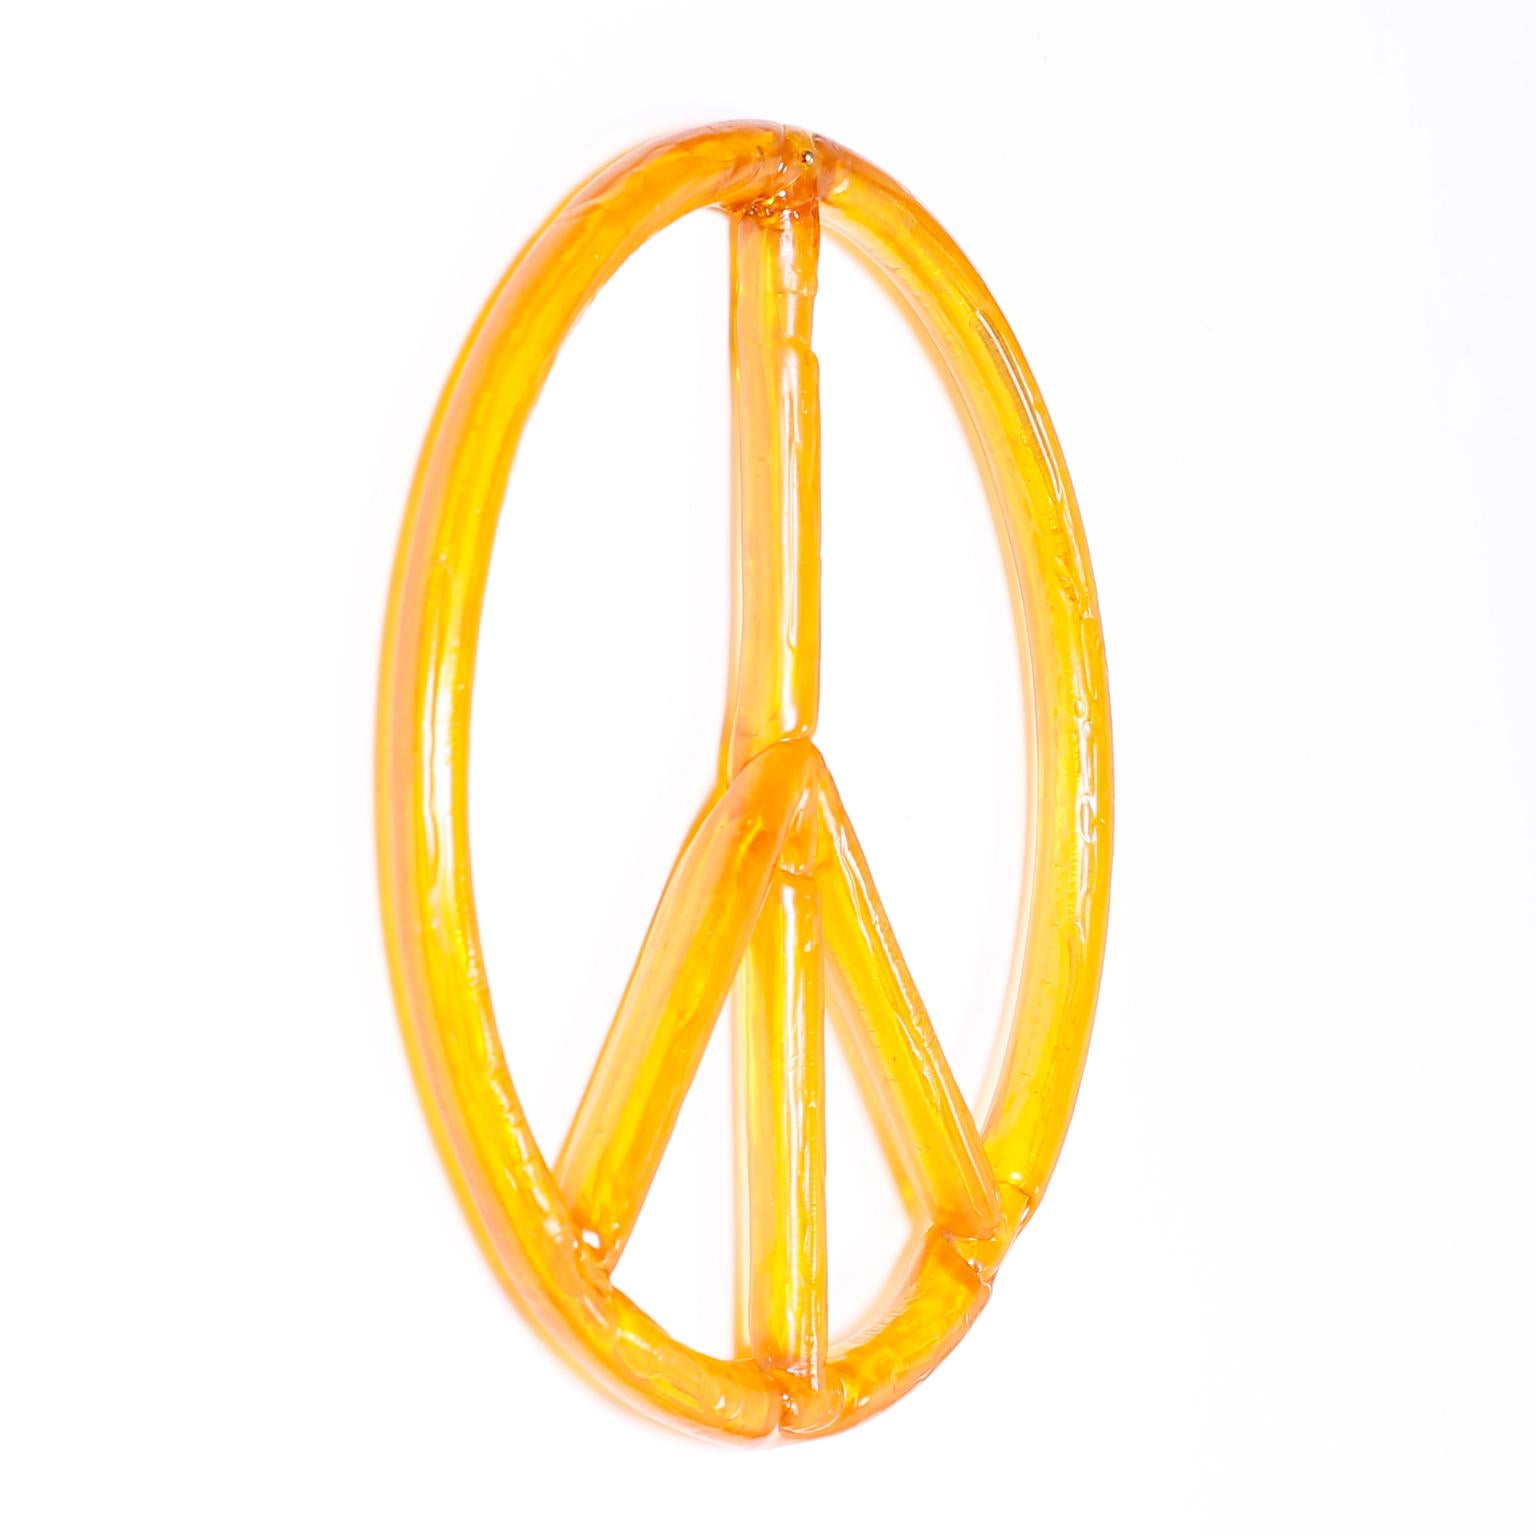 Peace sign handcrafted in molded amber acrylic, standing the test of time as a symbol of our cultural history.